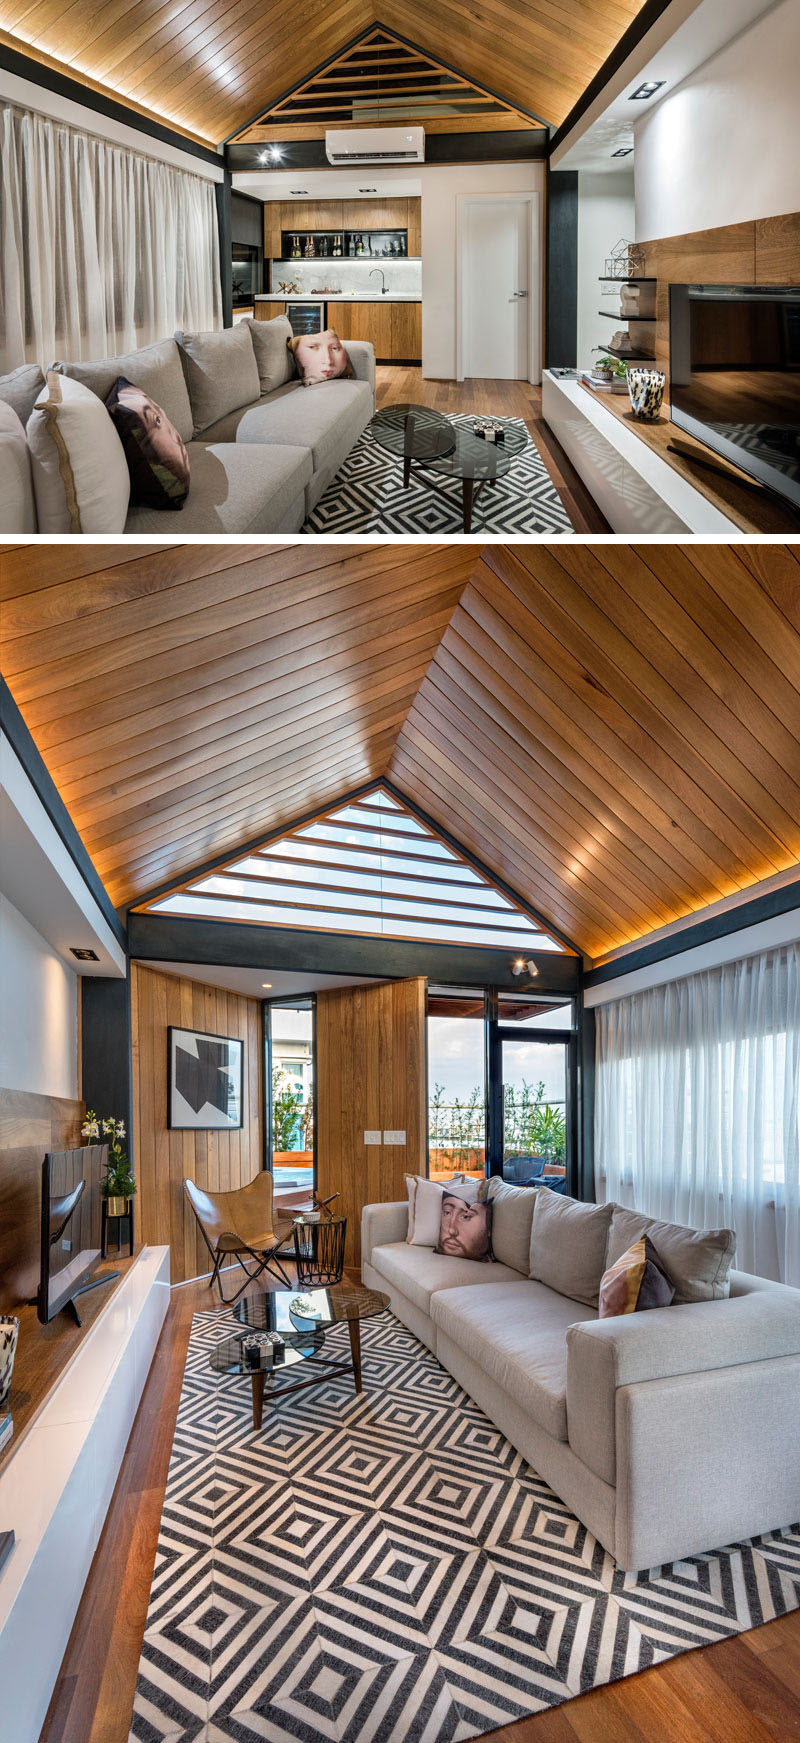 This rooftop terrace is home to a gabled wooden ceiling with hidden lighting. There's also a small kitchen/bar area and a large couch makes for a comfortable spot to watch movies.